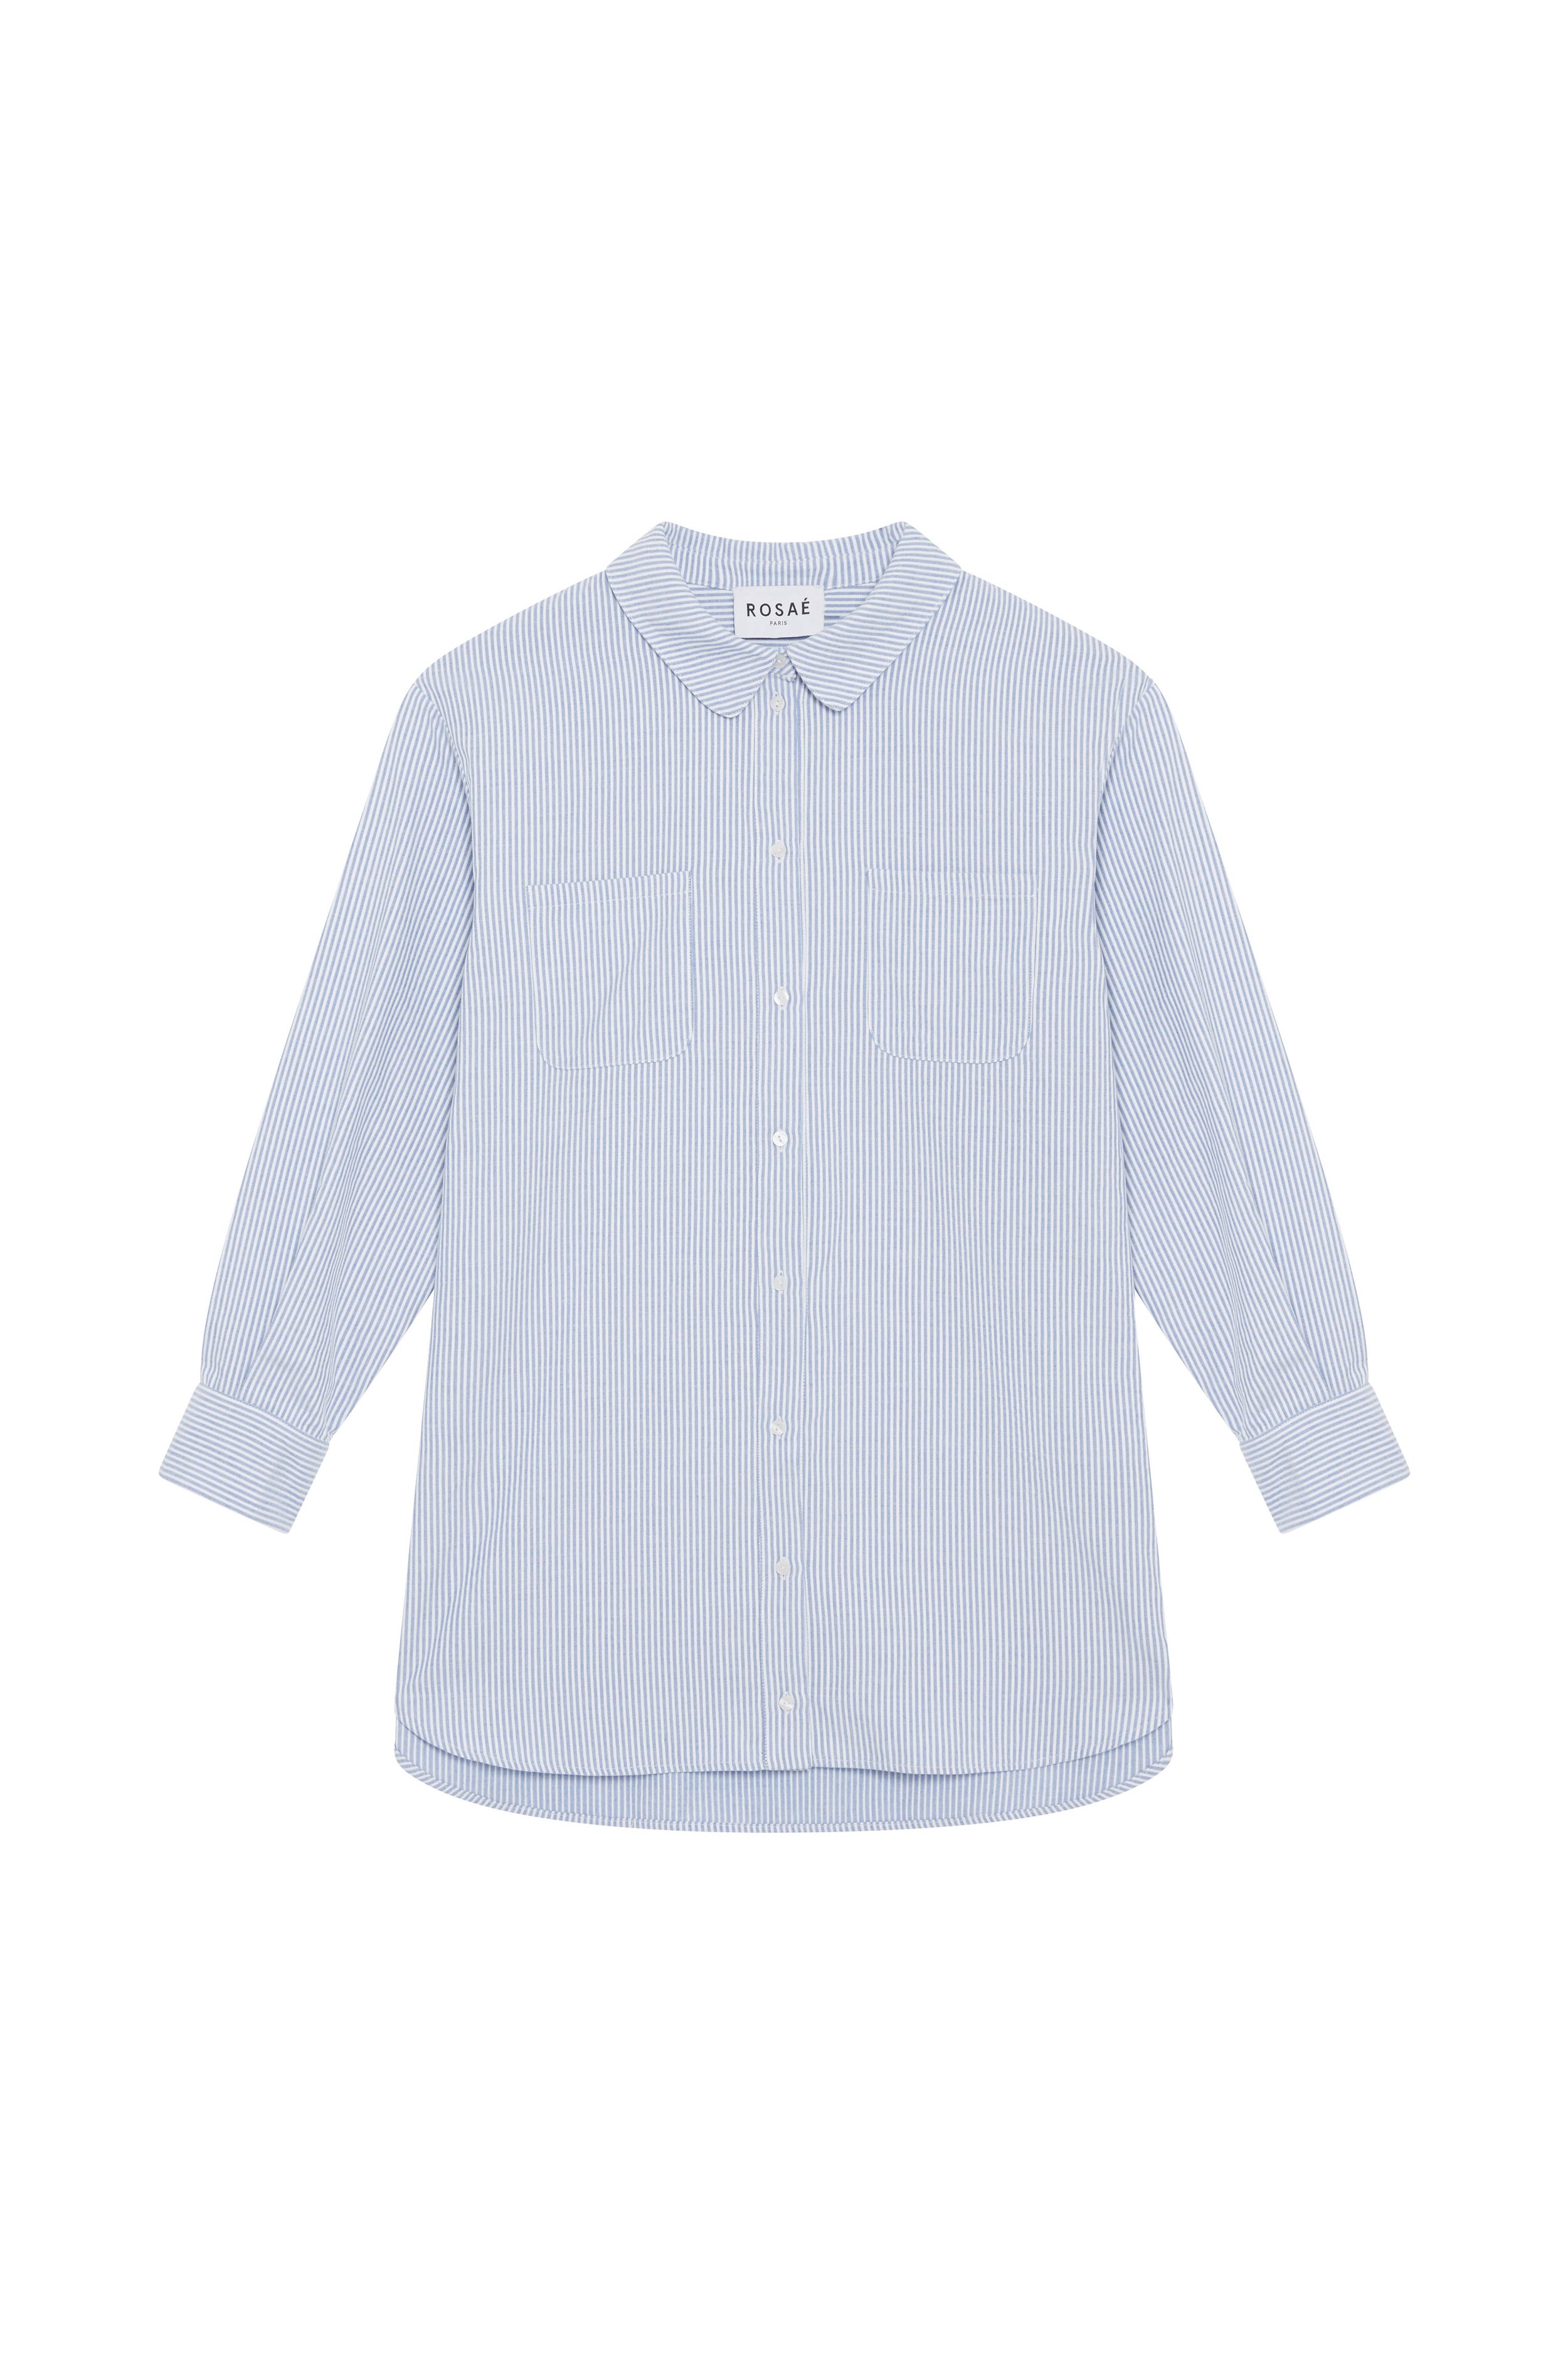 Le Hugo - The Must-Have Shirt Dress You Can Wear All Year Long — Rosae ...